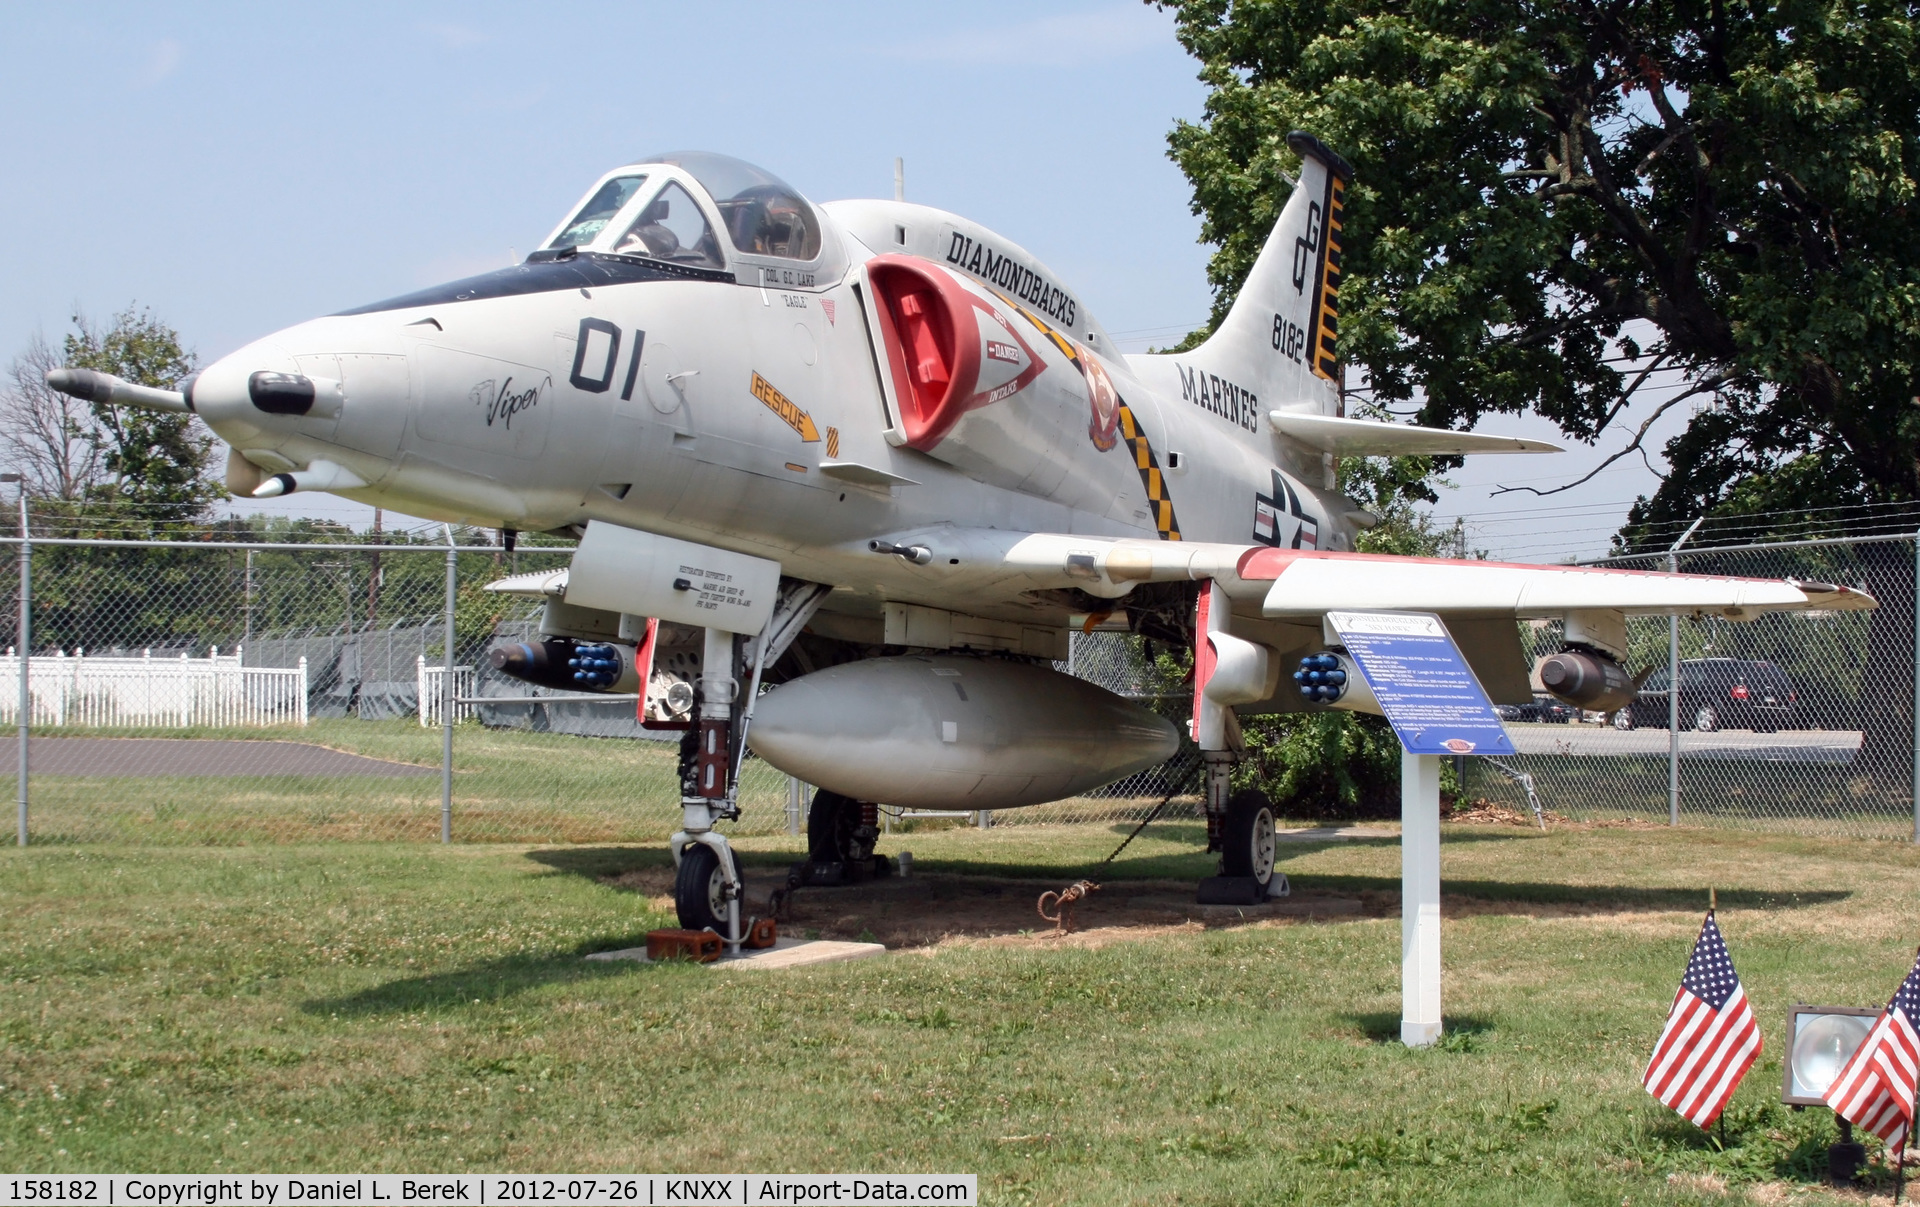 158182, 1971 Douglas A-4M Skyhawk C/N 14219, This Skyhawk is now part of the Wings of Freedom Museum collection.